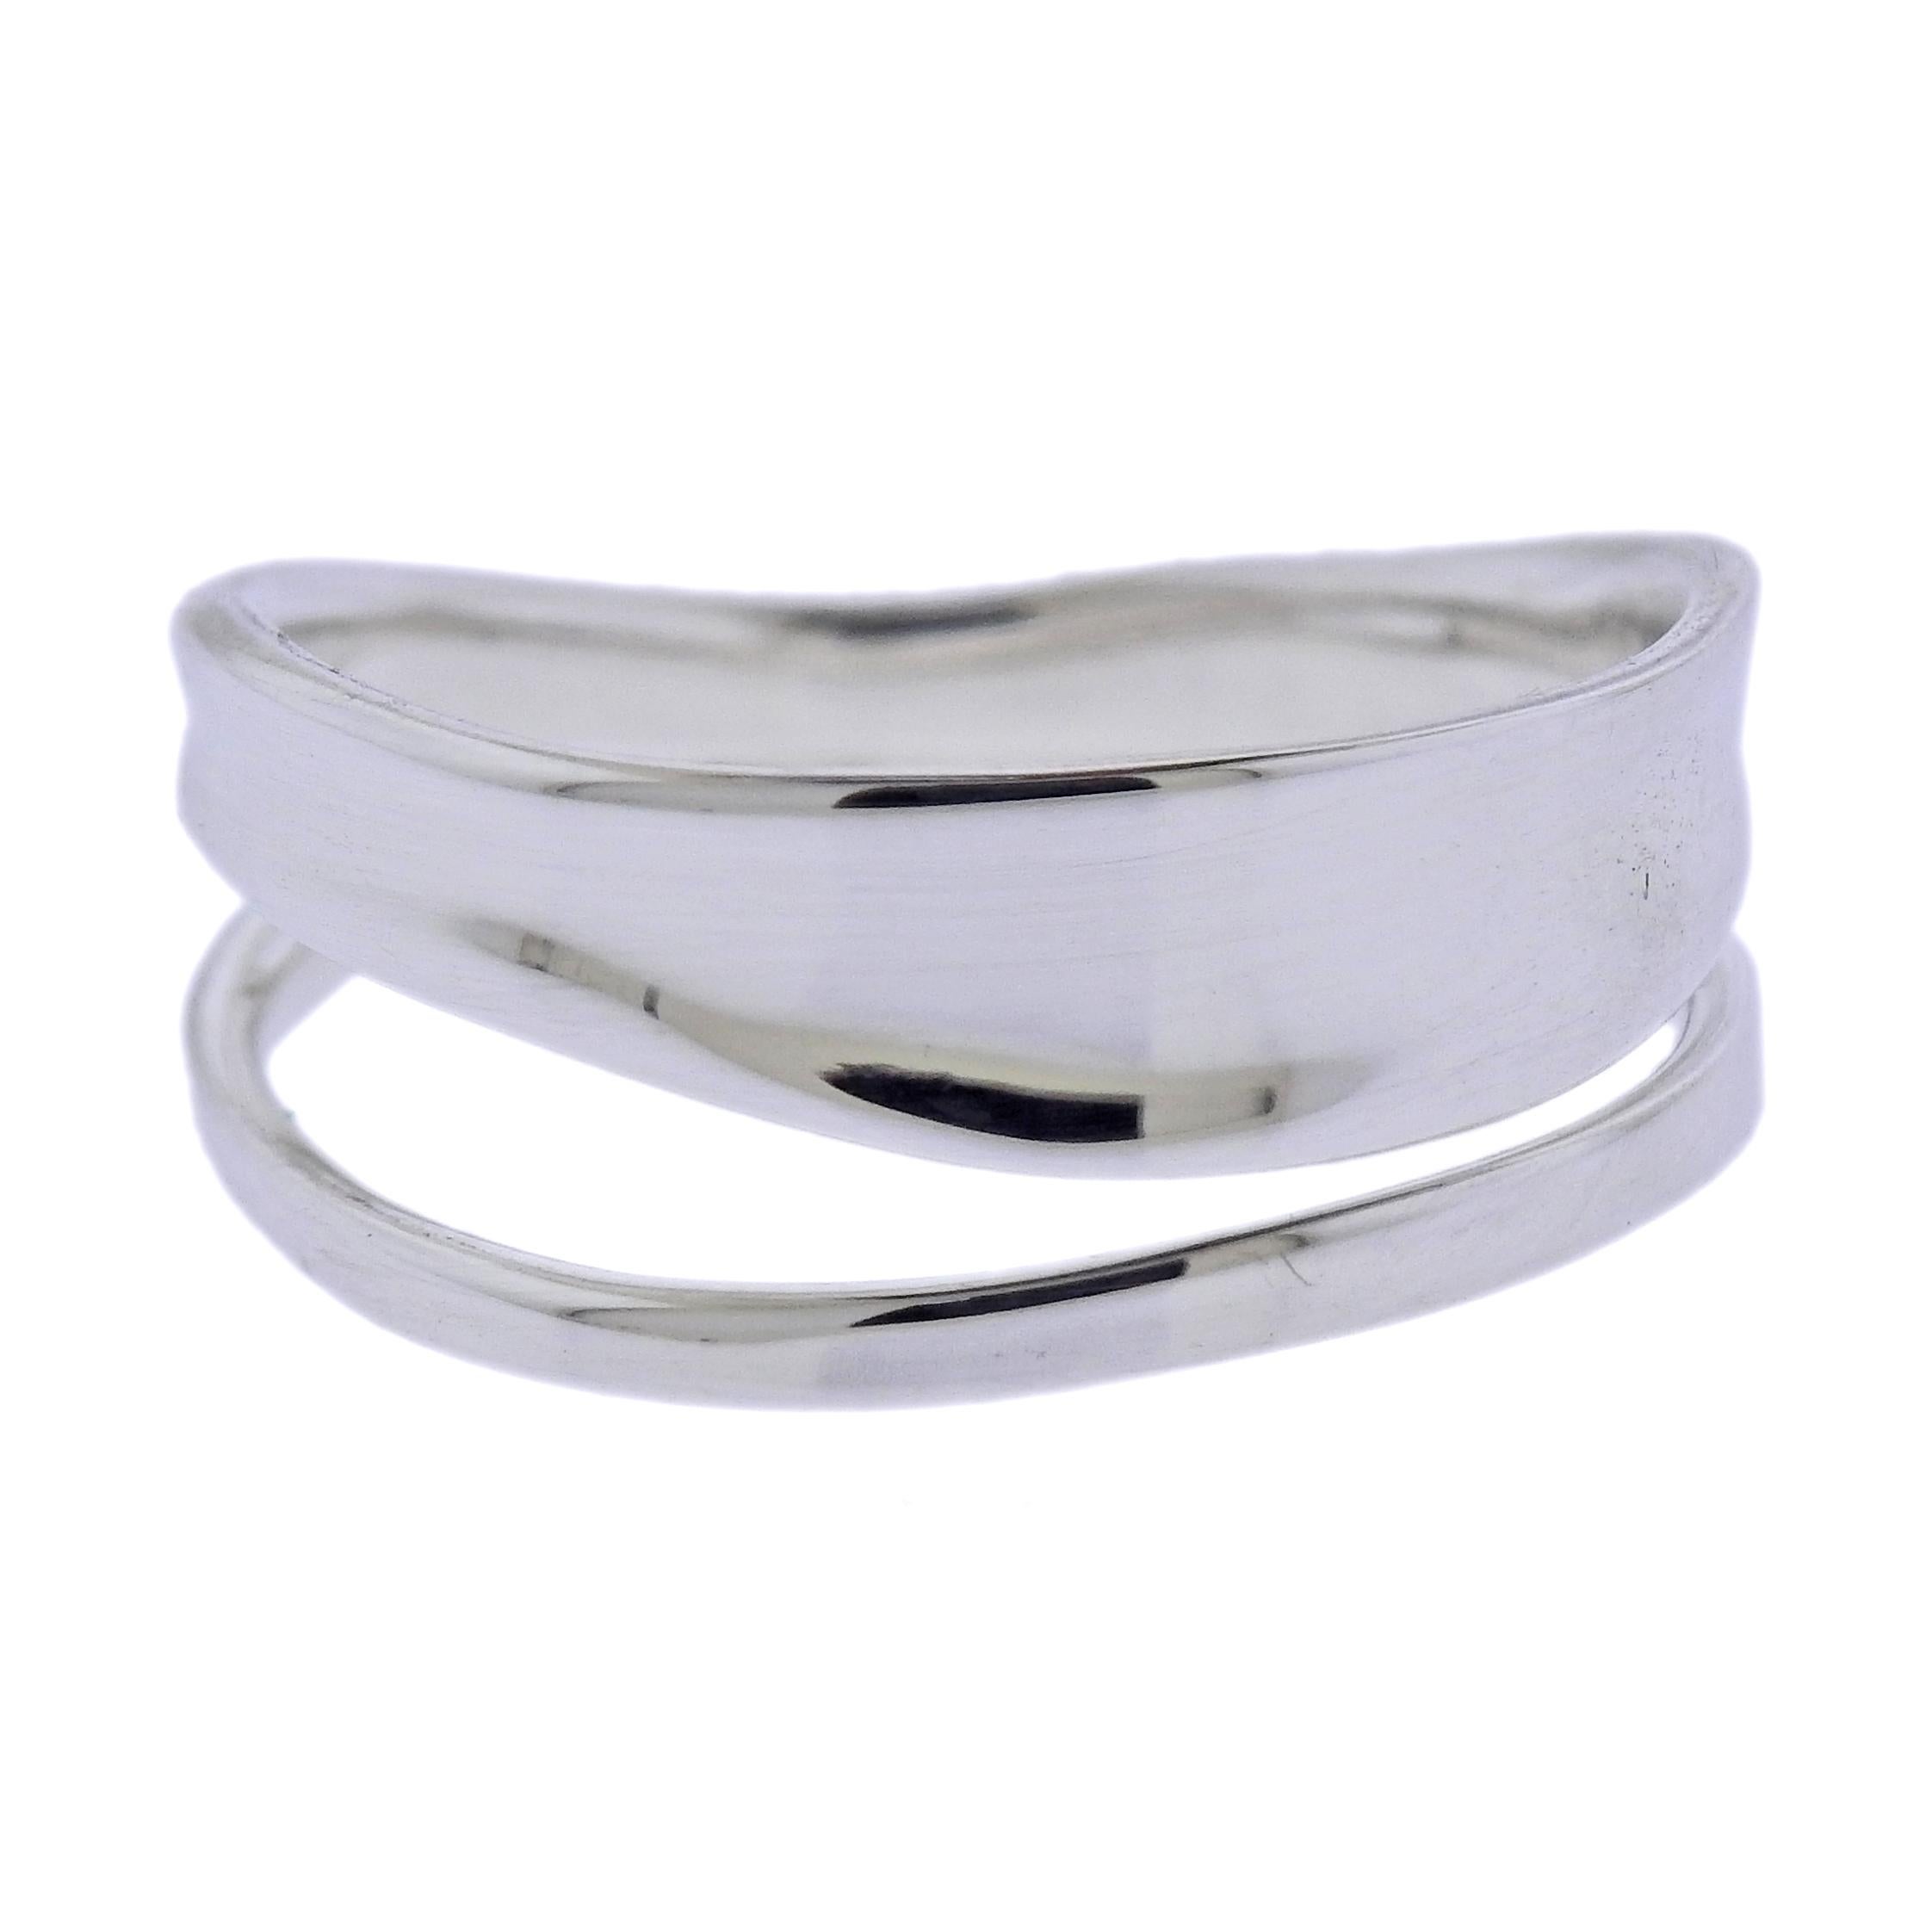 Brand new Georg Jensen sterling silver Marcia ring. Ring measures 9mm wide and available is following sizes: 56;57;58;59;60. Model# 3561100. Marked: GJ, 925 S, 618 B. Weight is 3.8 grams. 